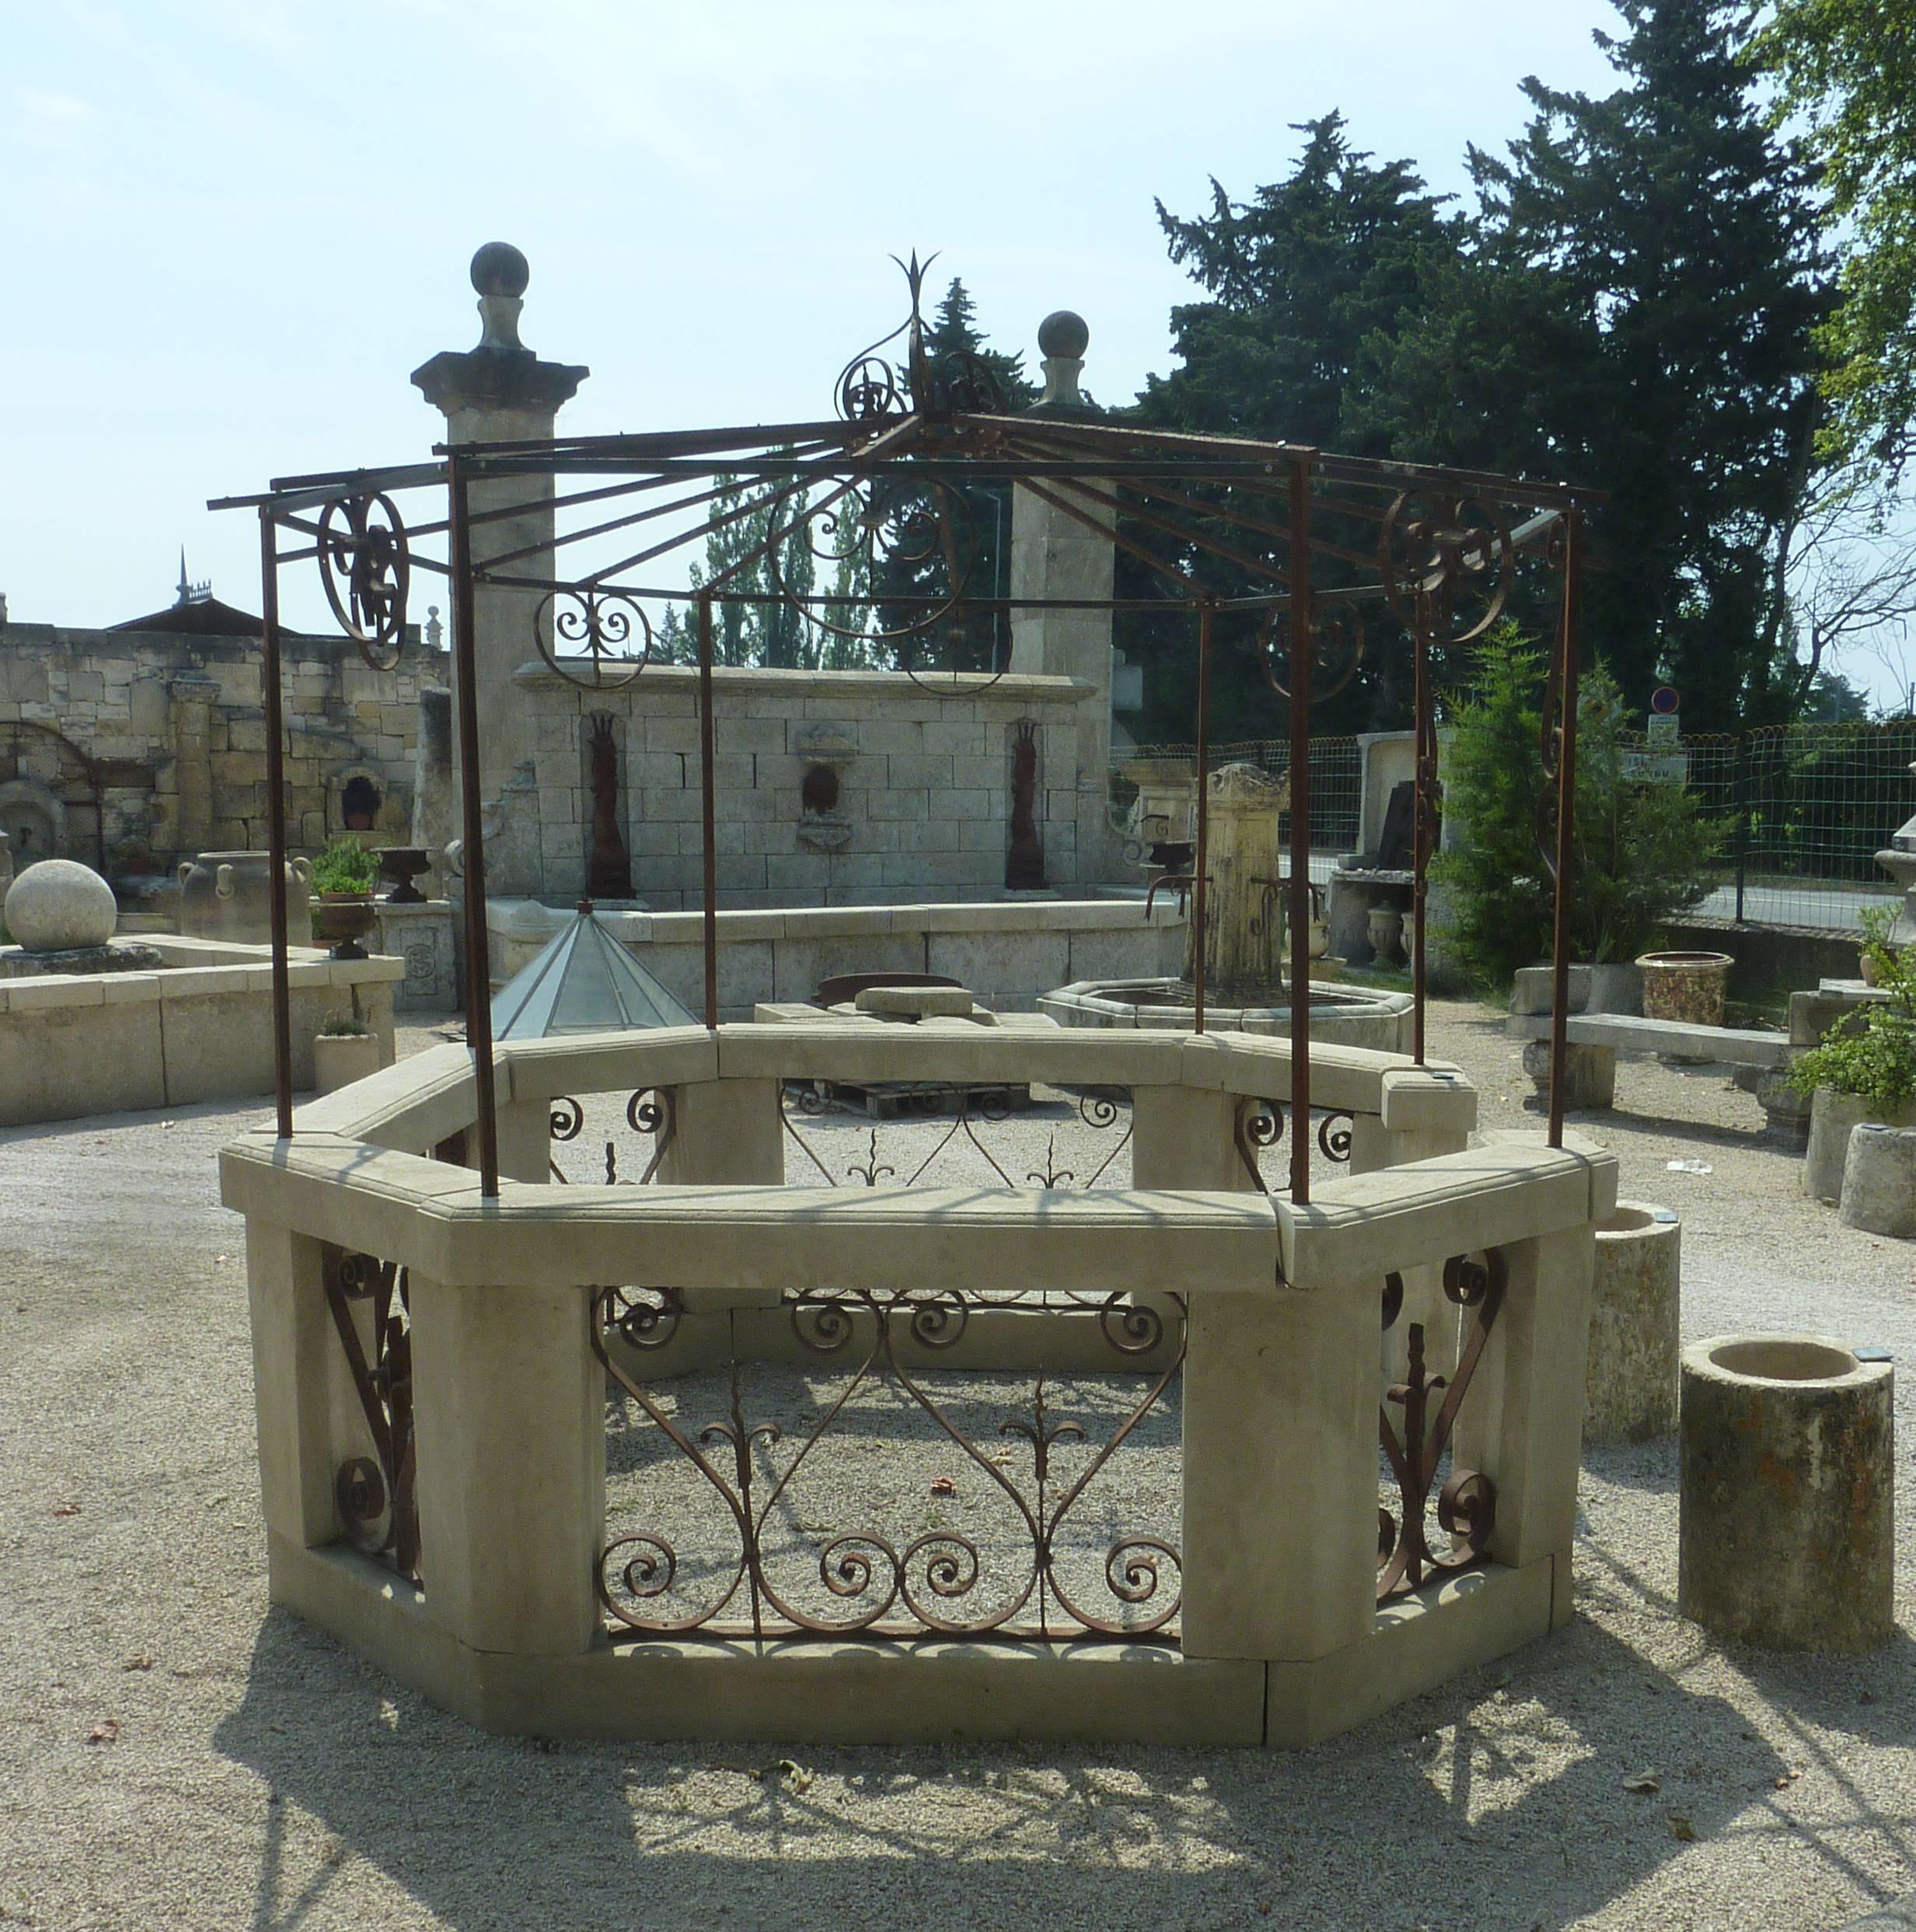 This kiosk is an original creation made from genuine antique materials in our stone-cutting Atelier in Provence.

Octagonal in shape, this charming kiosk is a garden pavilion that opens on all sides to better appreciate the landscape. It features